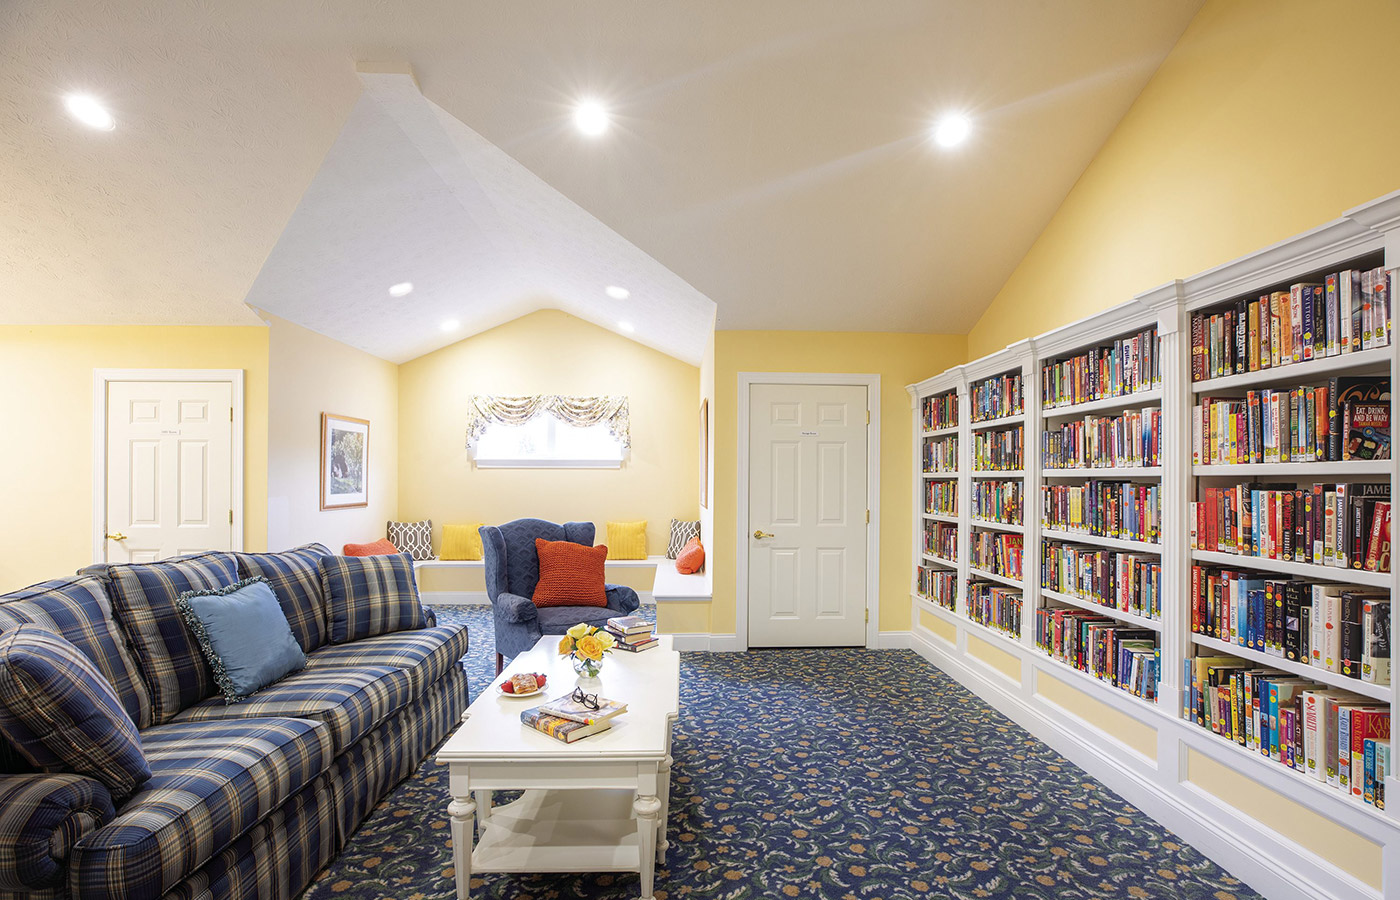 large sofa facing long book shelf within library